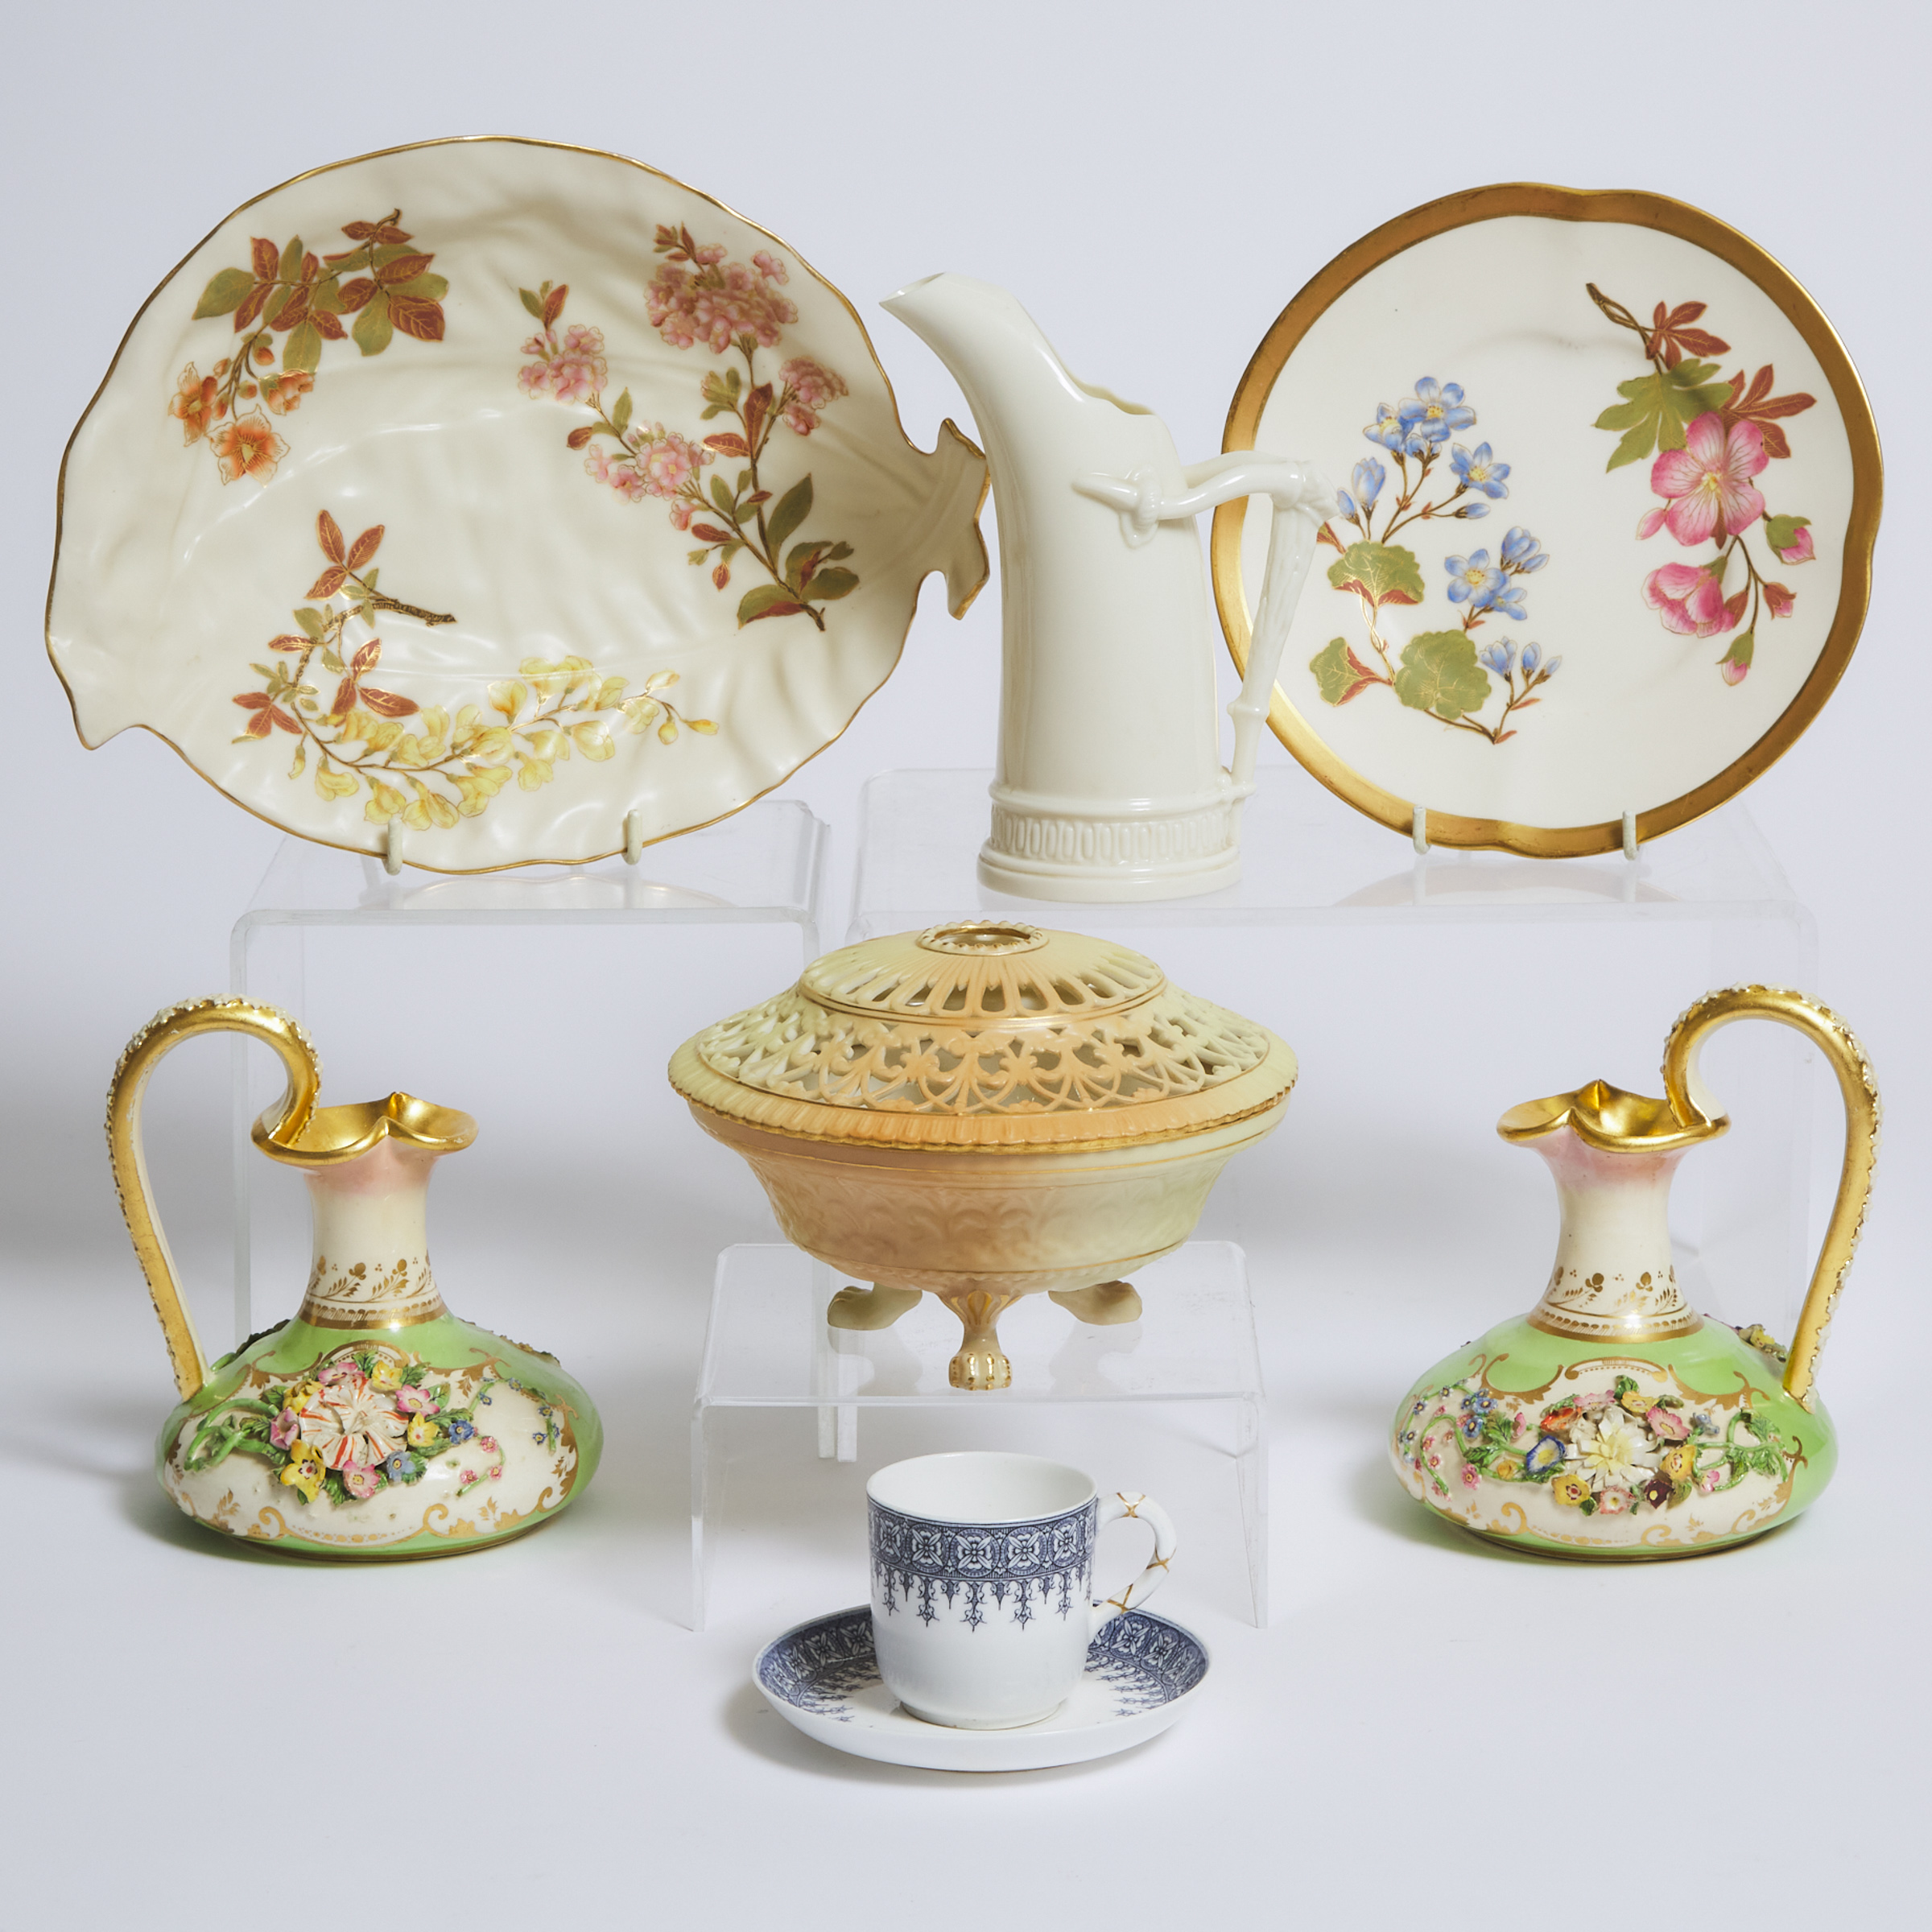 Group of Royal Worcester Porcelain and a Pair of Derby Ewers, late 19th/early 20th century